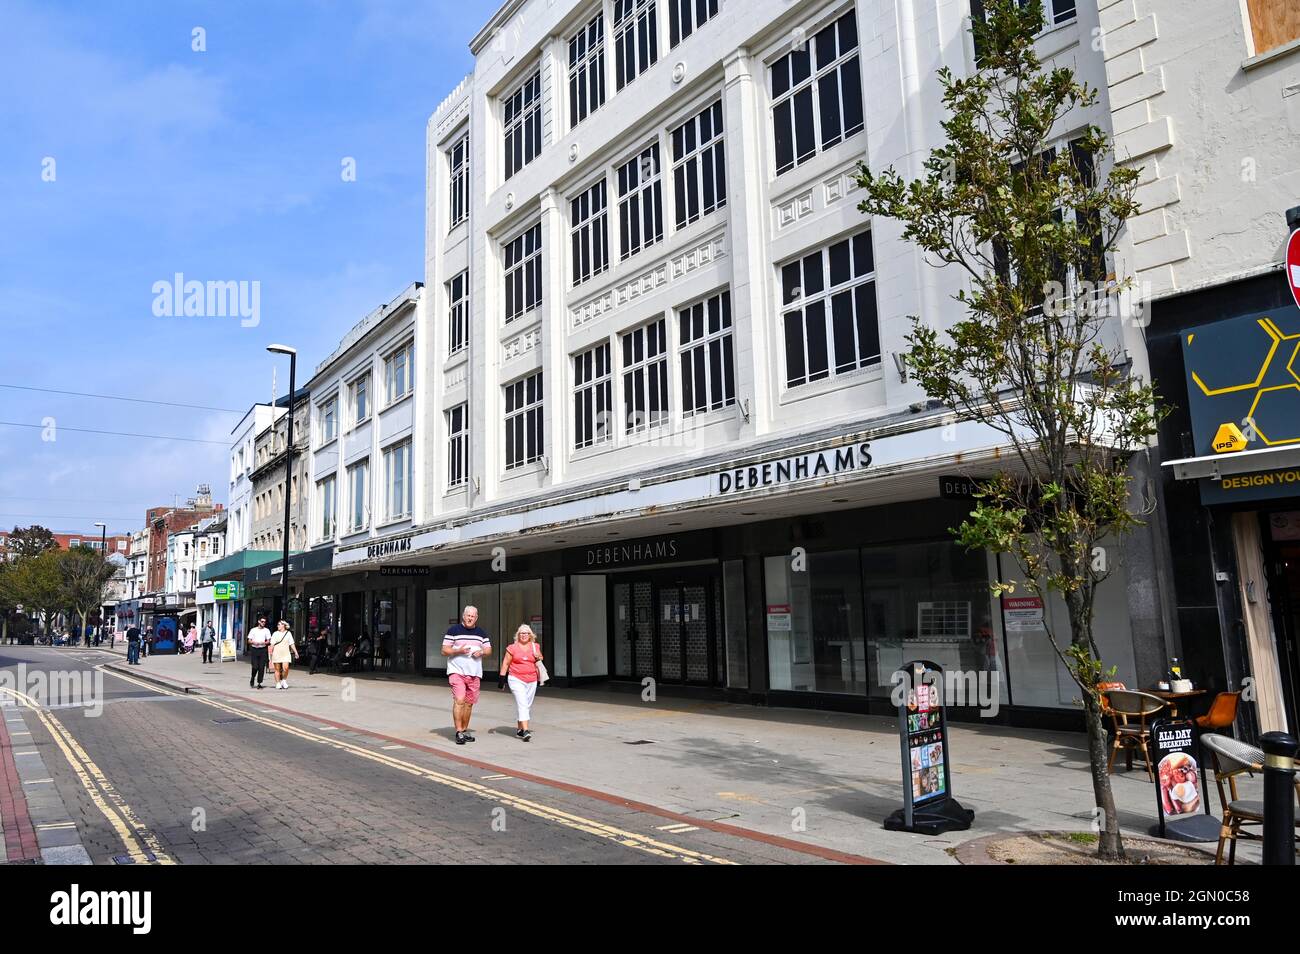 The closed down Debenhams Department store in Worthing , West Sussex , England , UK  Photograph taken by Simon Dack Stock Photo